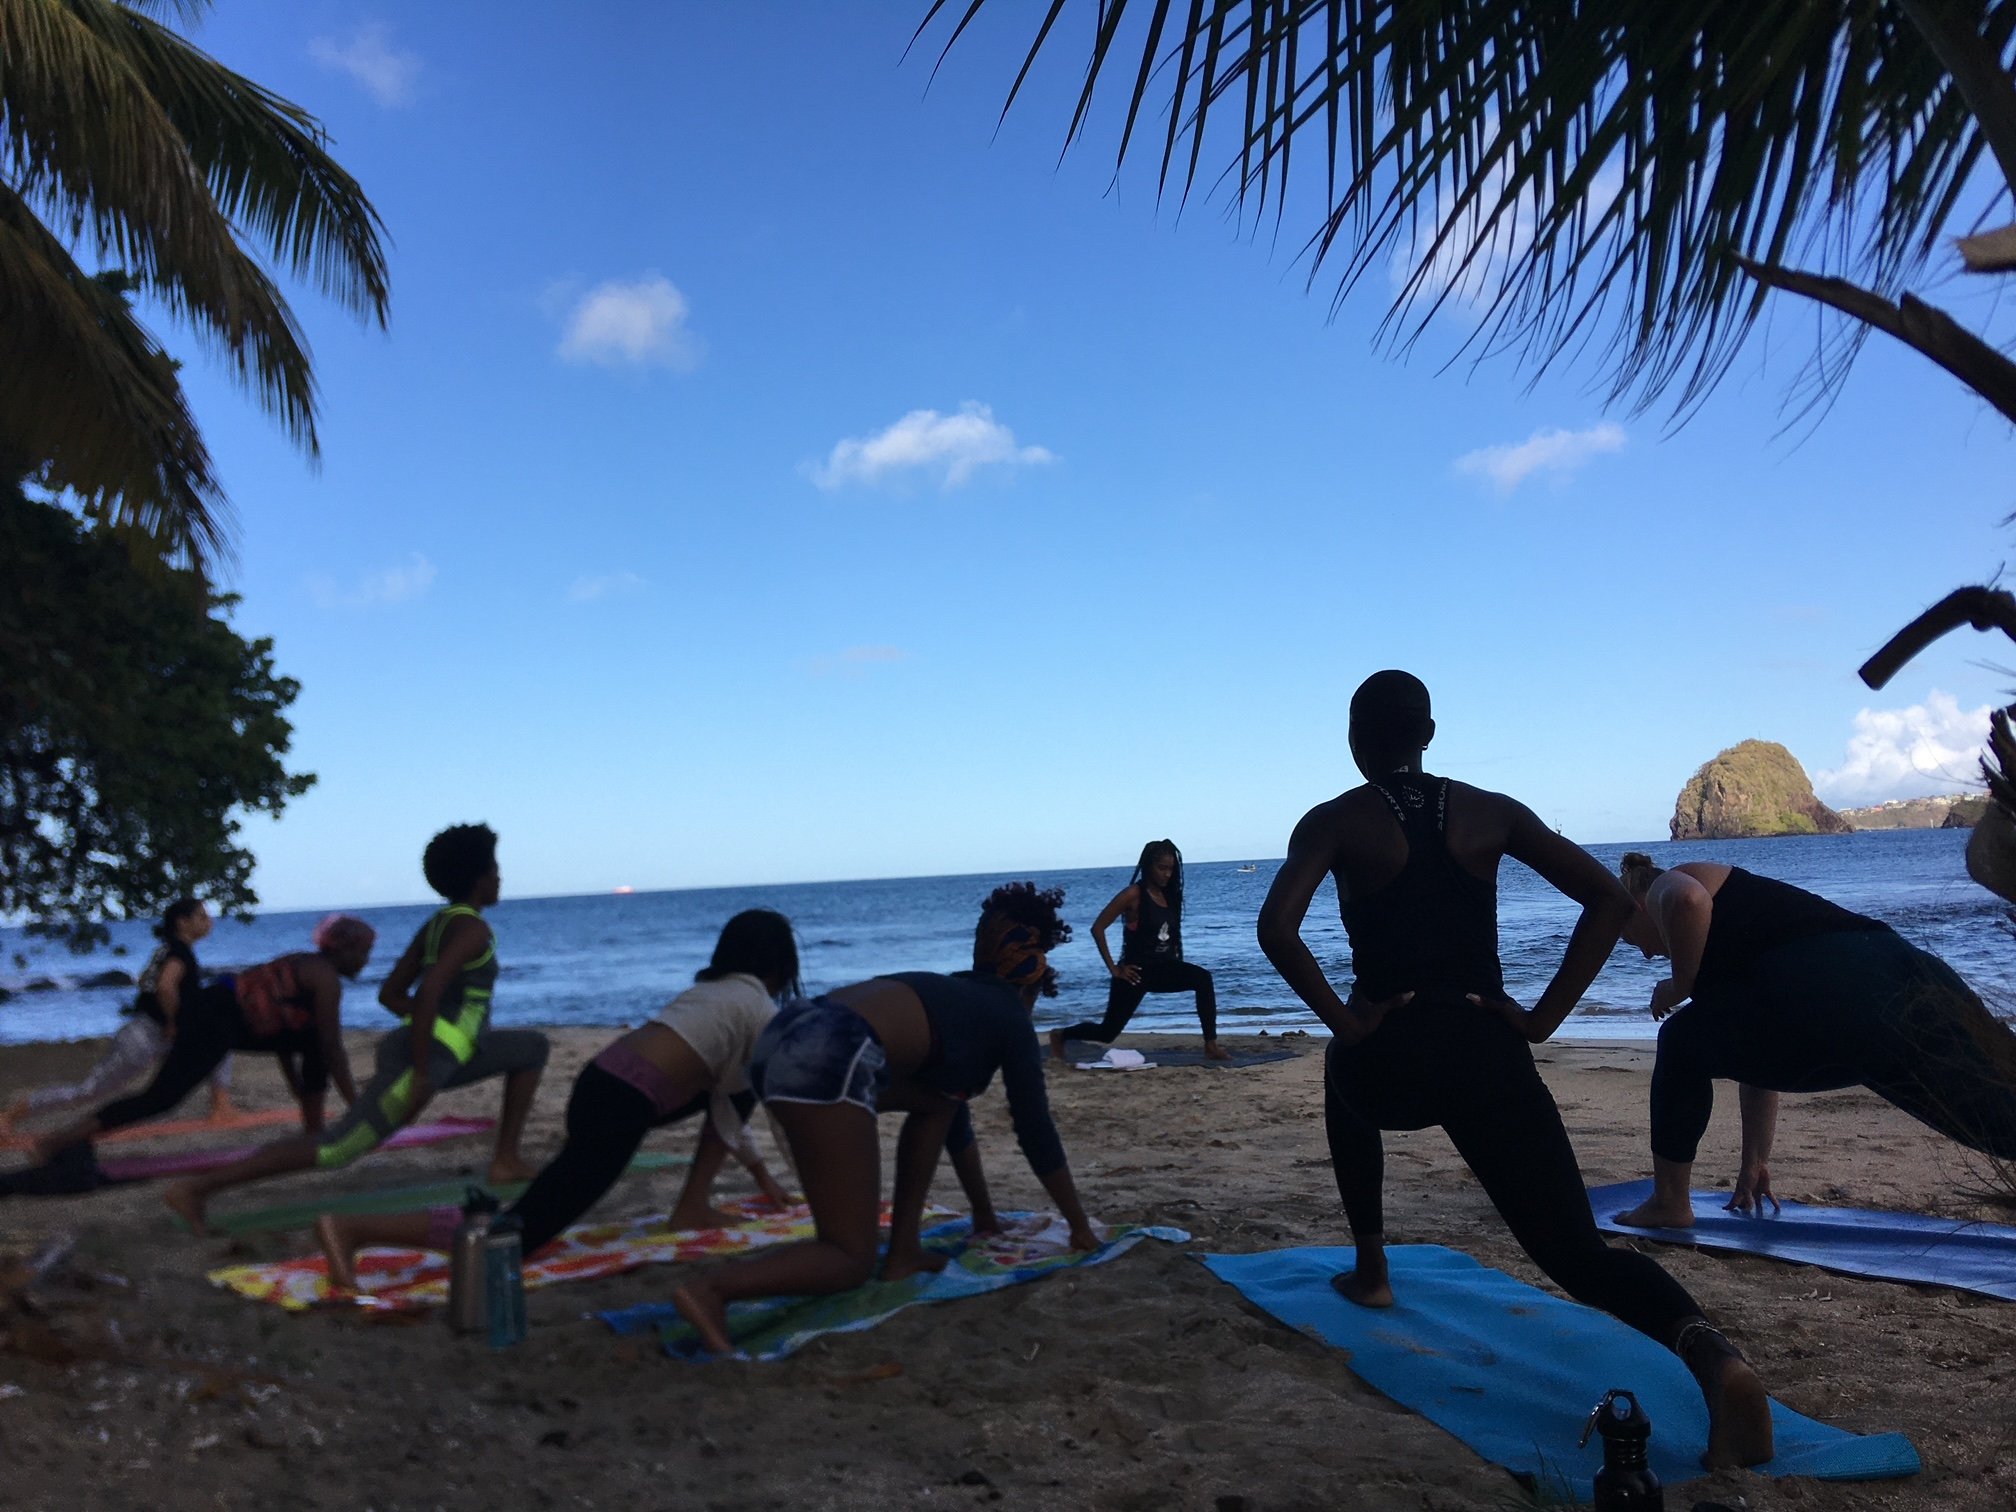 happy-brown-girl-on-the-beach-soka-gyal-march-14-2020-lunge-yoga-in-st-vincent-and-the-grenadines.JPG